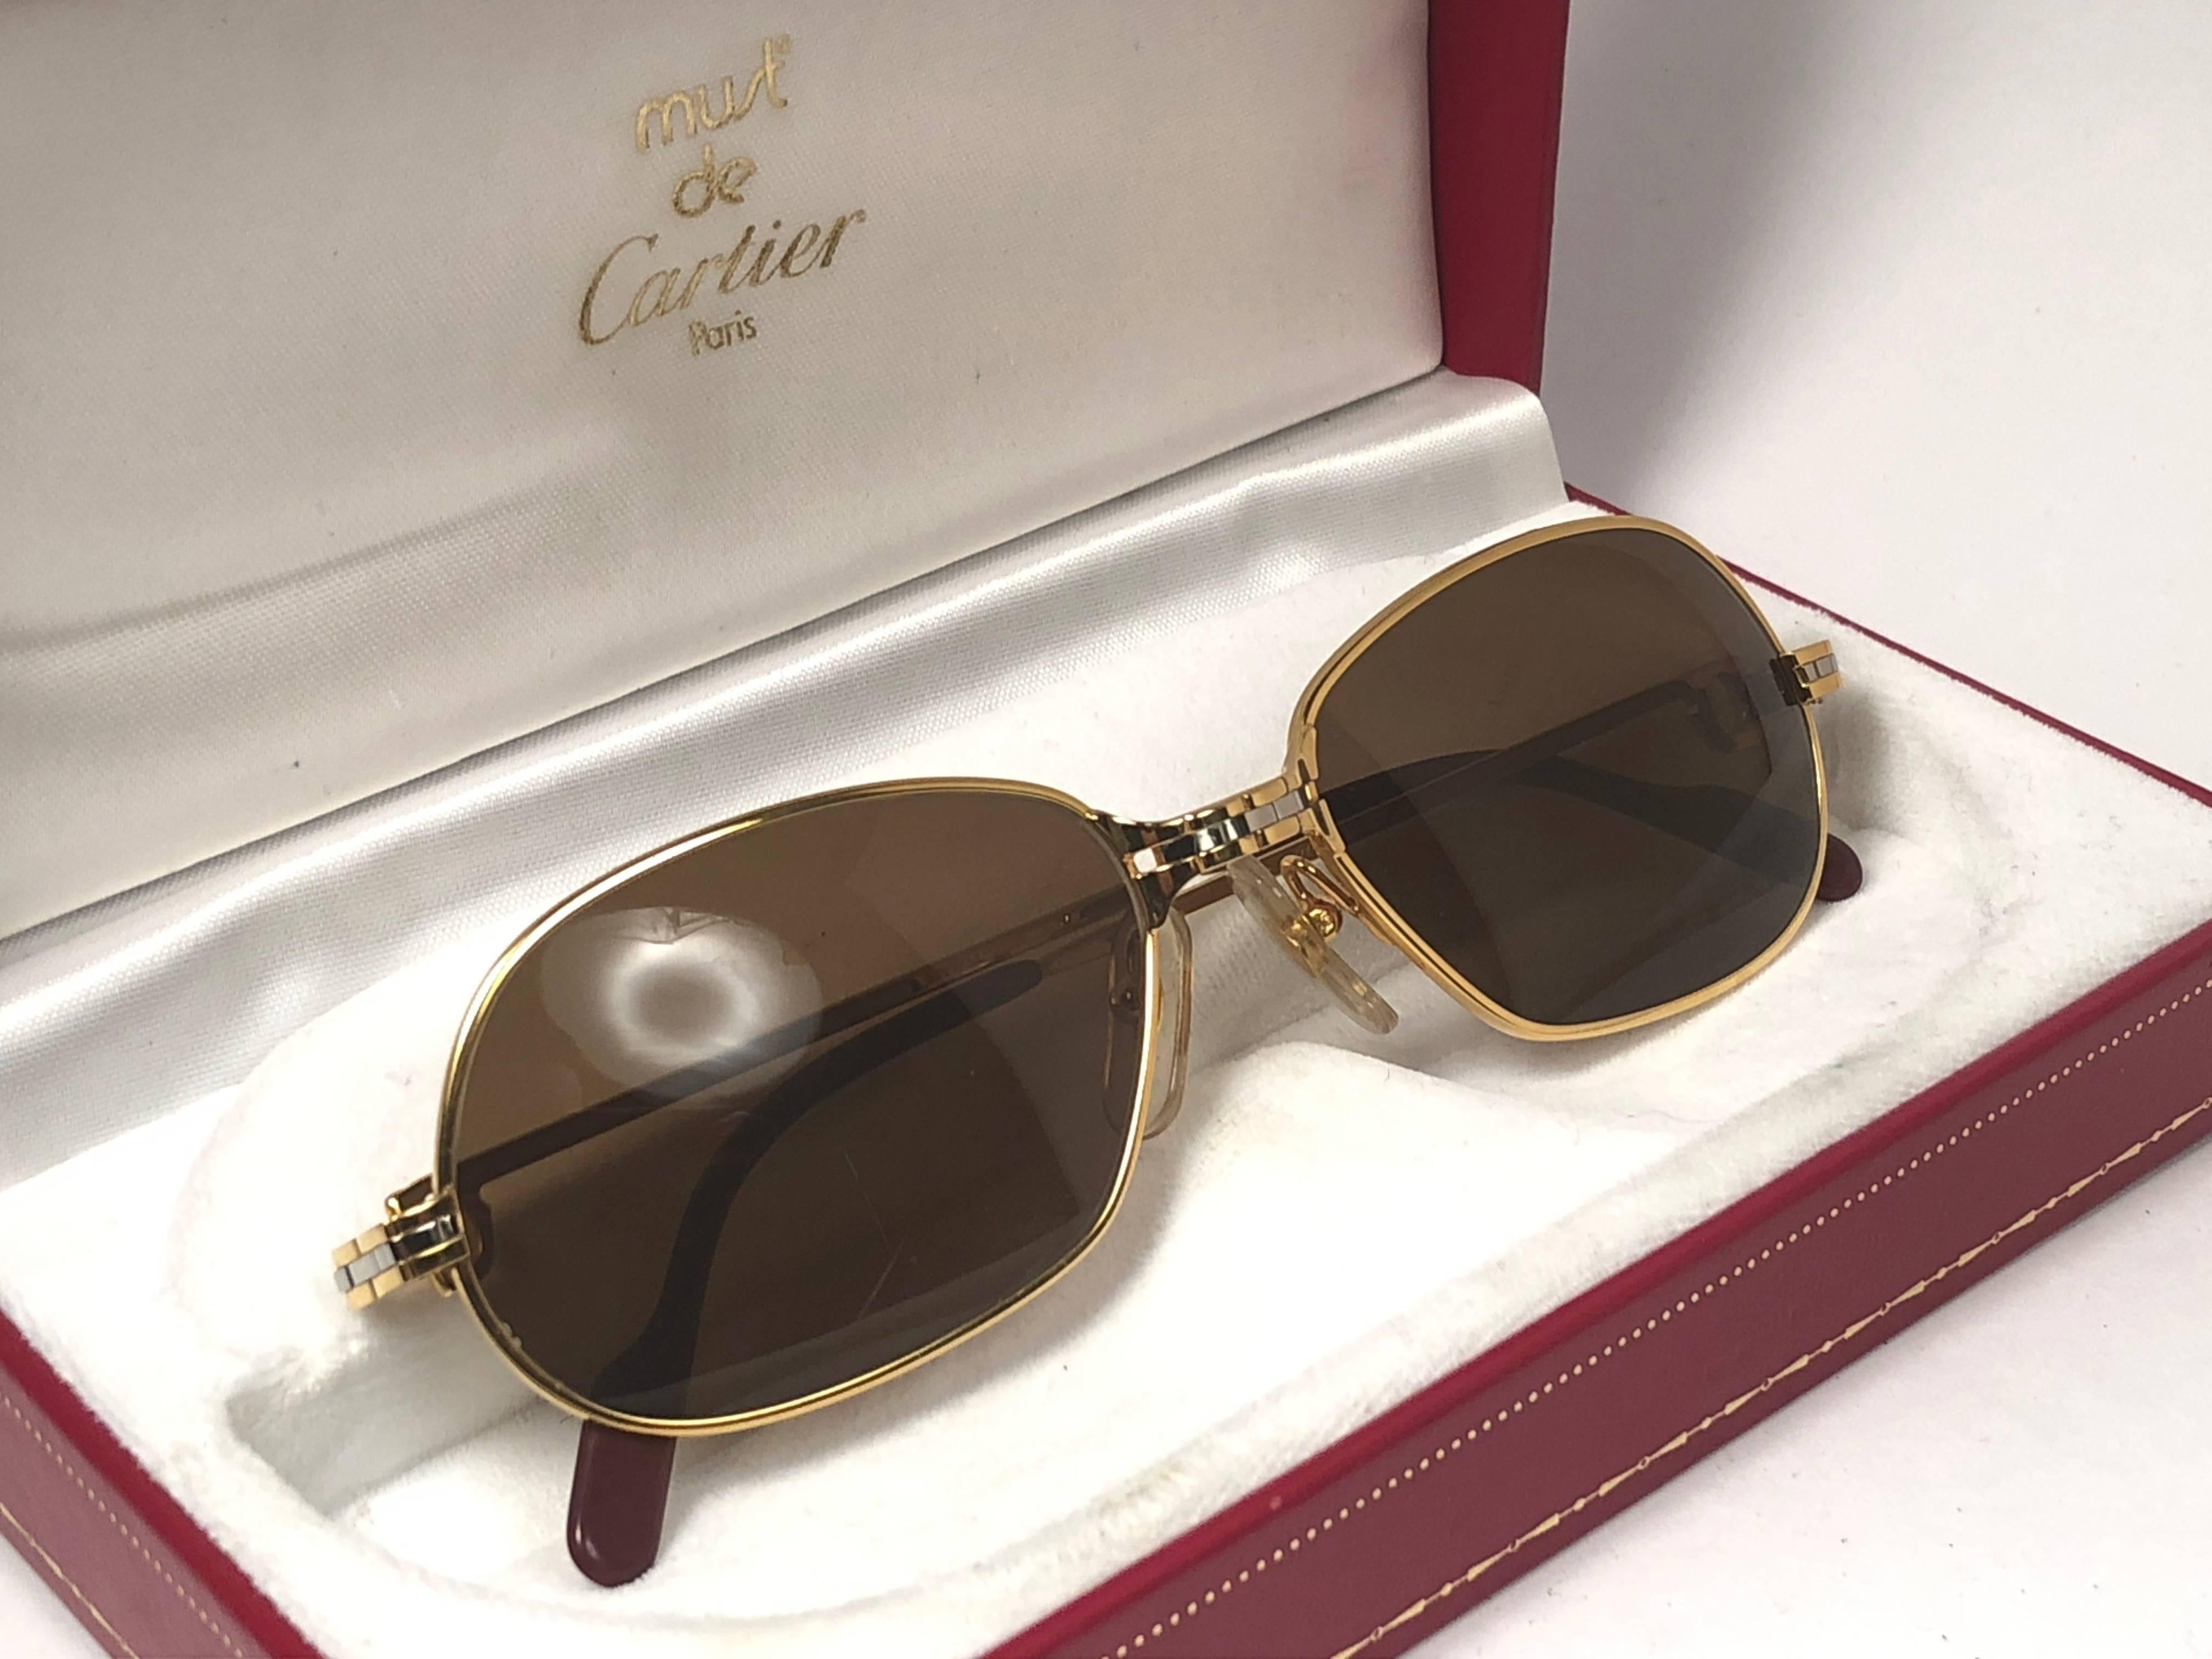 New 1988 Cartier Panthere GM sunglasses with solid brown  (uv protection) lenses.  Frame is with the front and sides in yellow and white gold. All hallmarks. burgundy ear paddles. 
Both arms sport the C from Cartier on the temple. 
These are like a